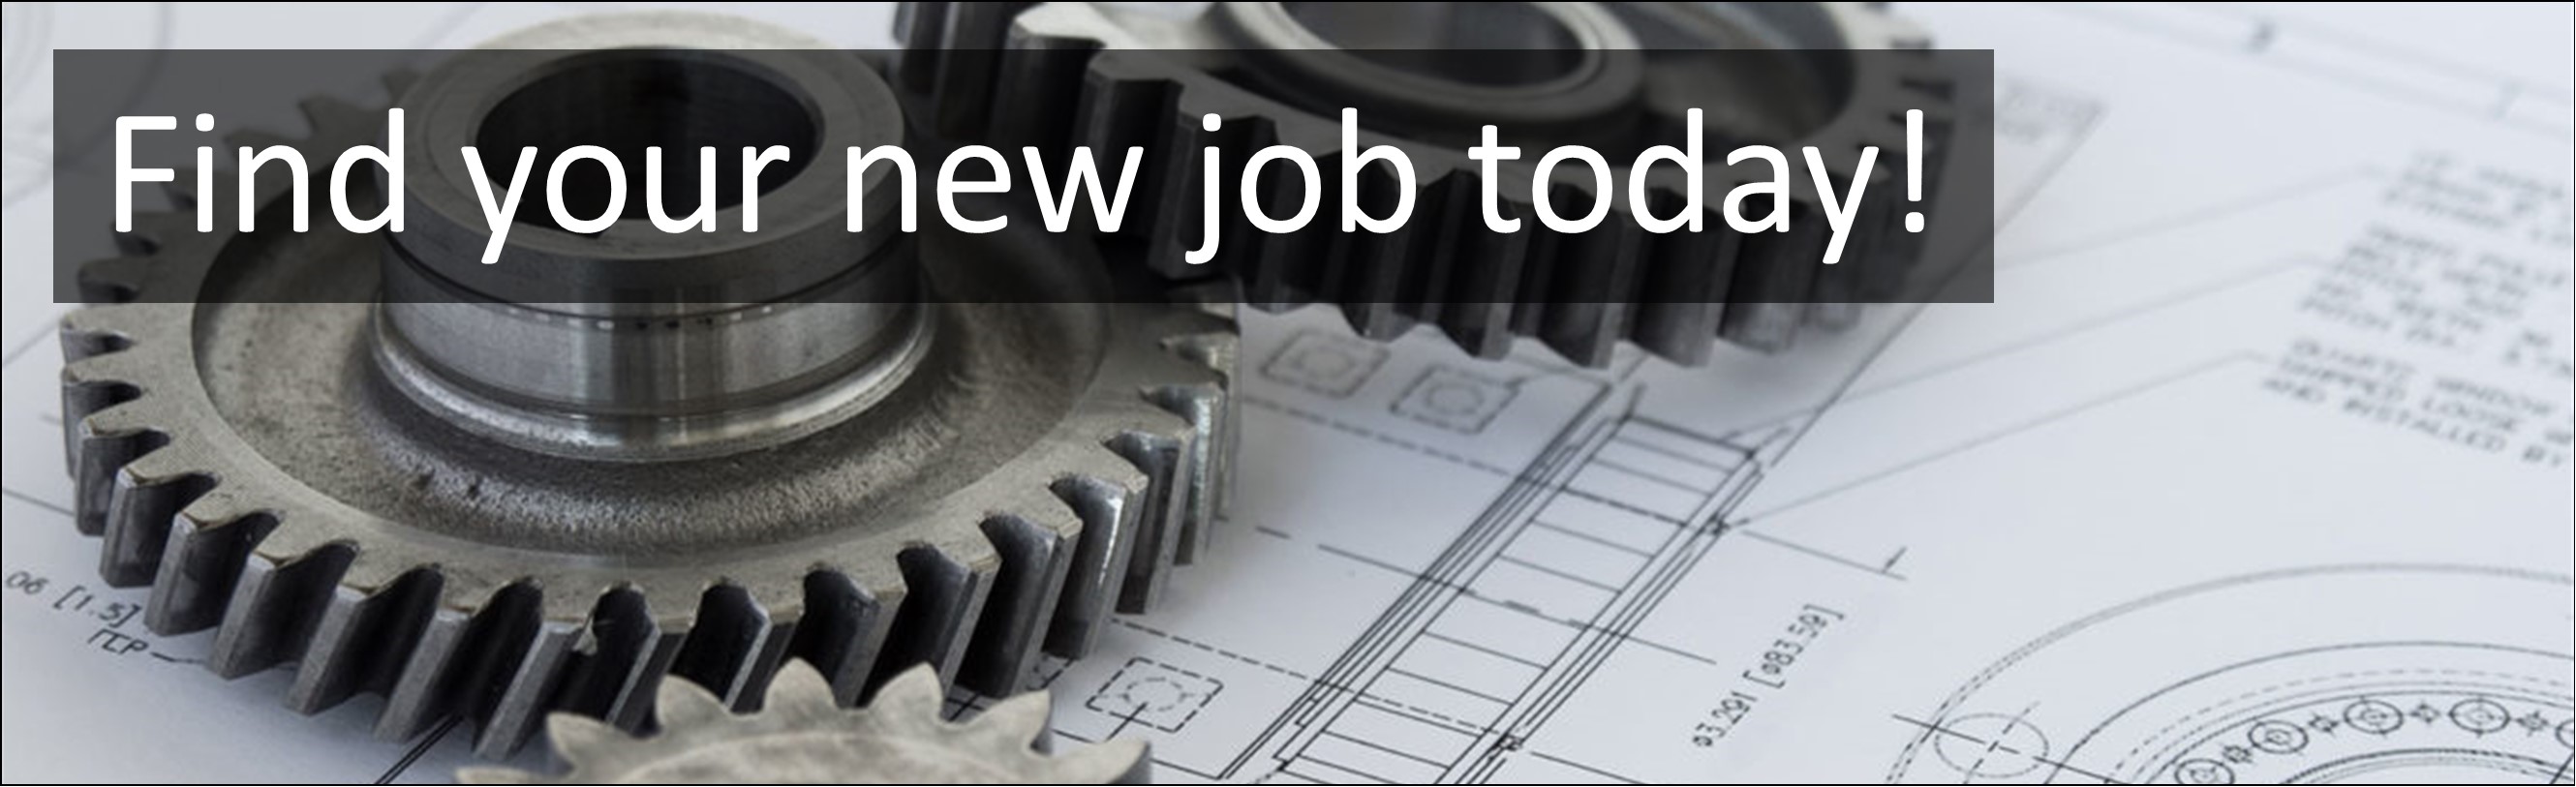 Engineering Jobs. Gas Engineer / Commercial Jobs, Careers & Vacancies in Exeter, Devon, South West England Advertised by AWD online – Multi-Job Board Advertising and CV Sourcing Recruitment Services